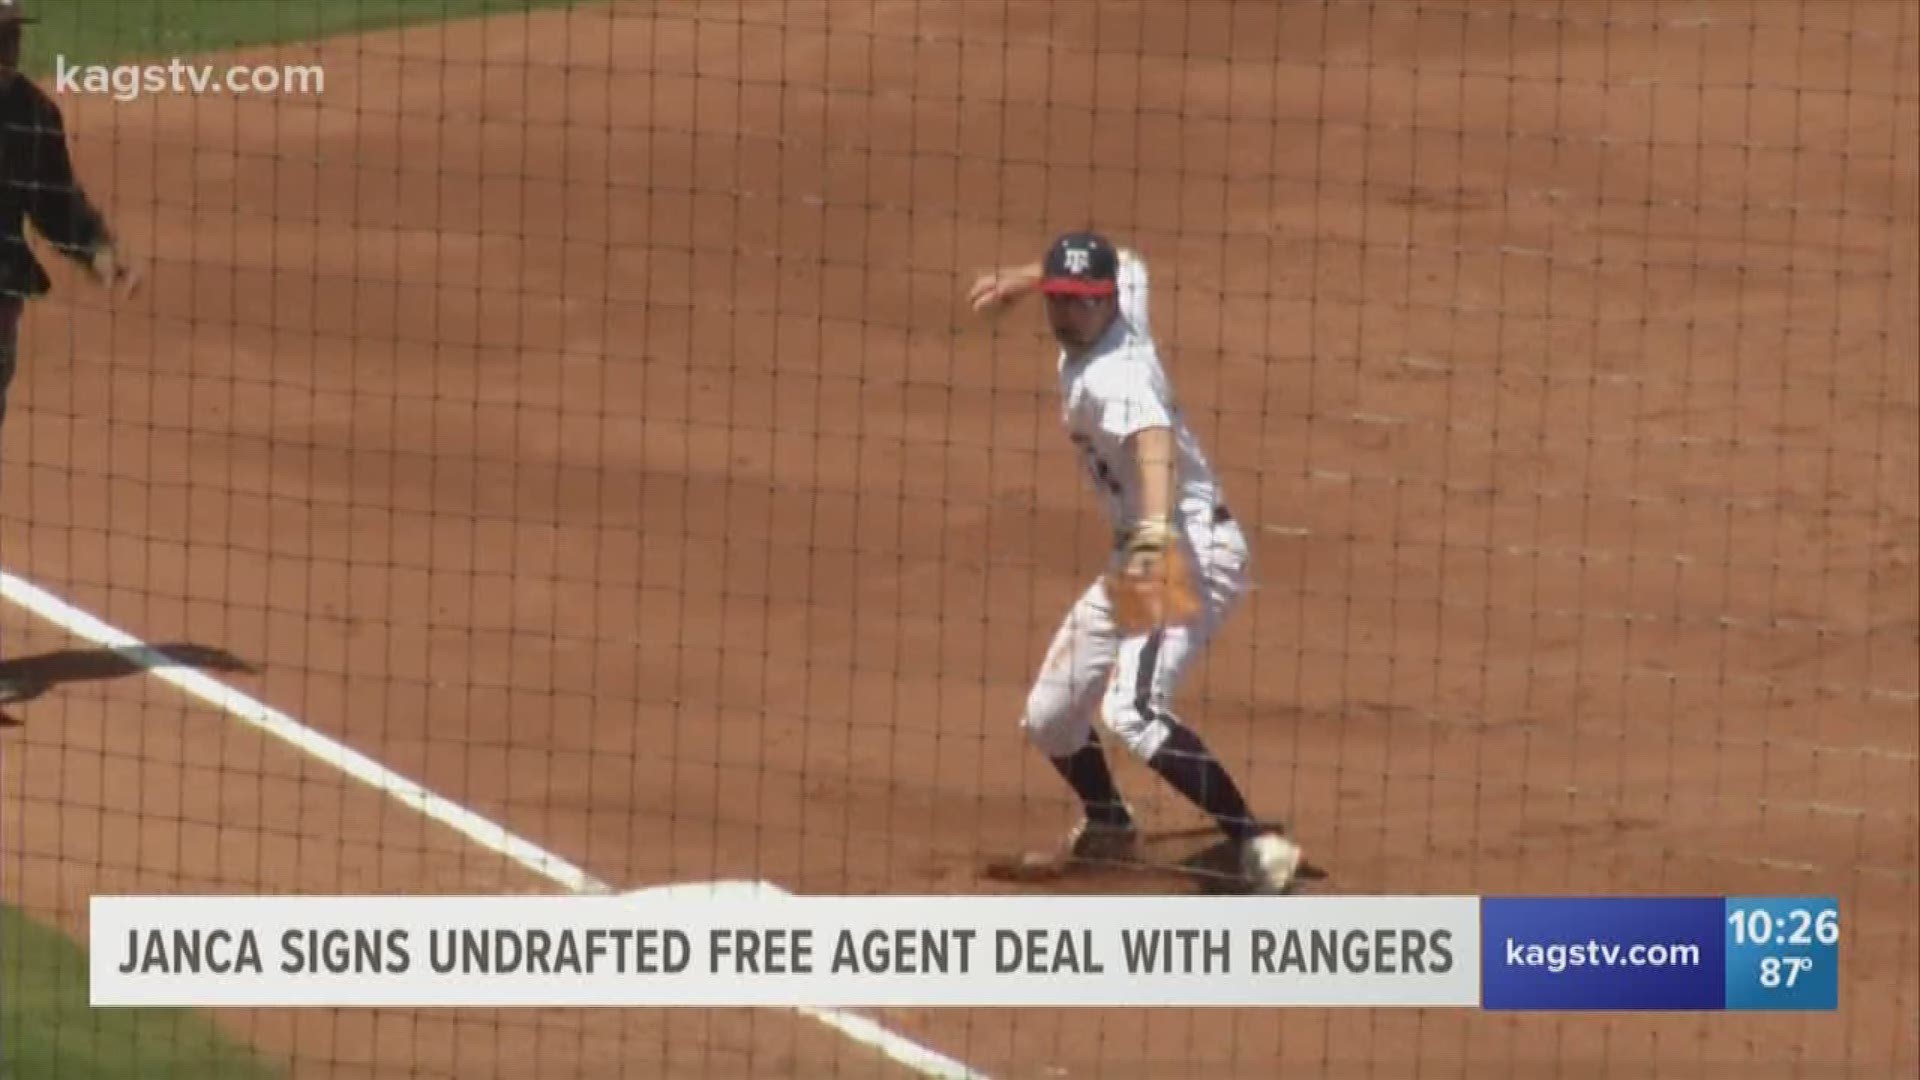 George Janca will leave the Aggies baseball program early after signing a contract with the Rangers.